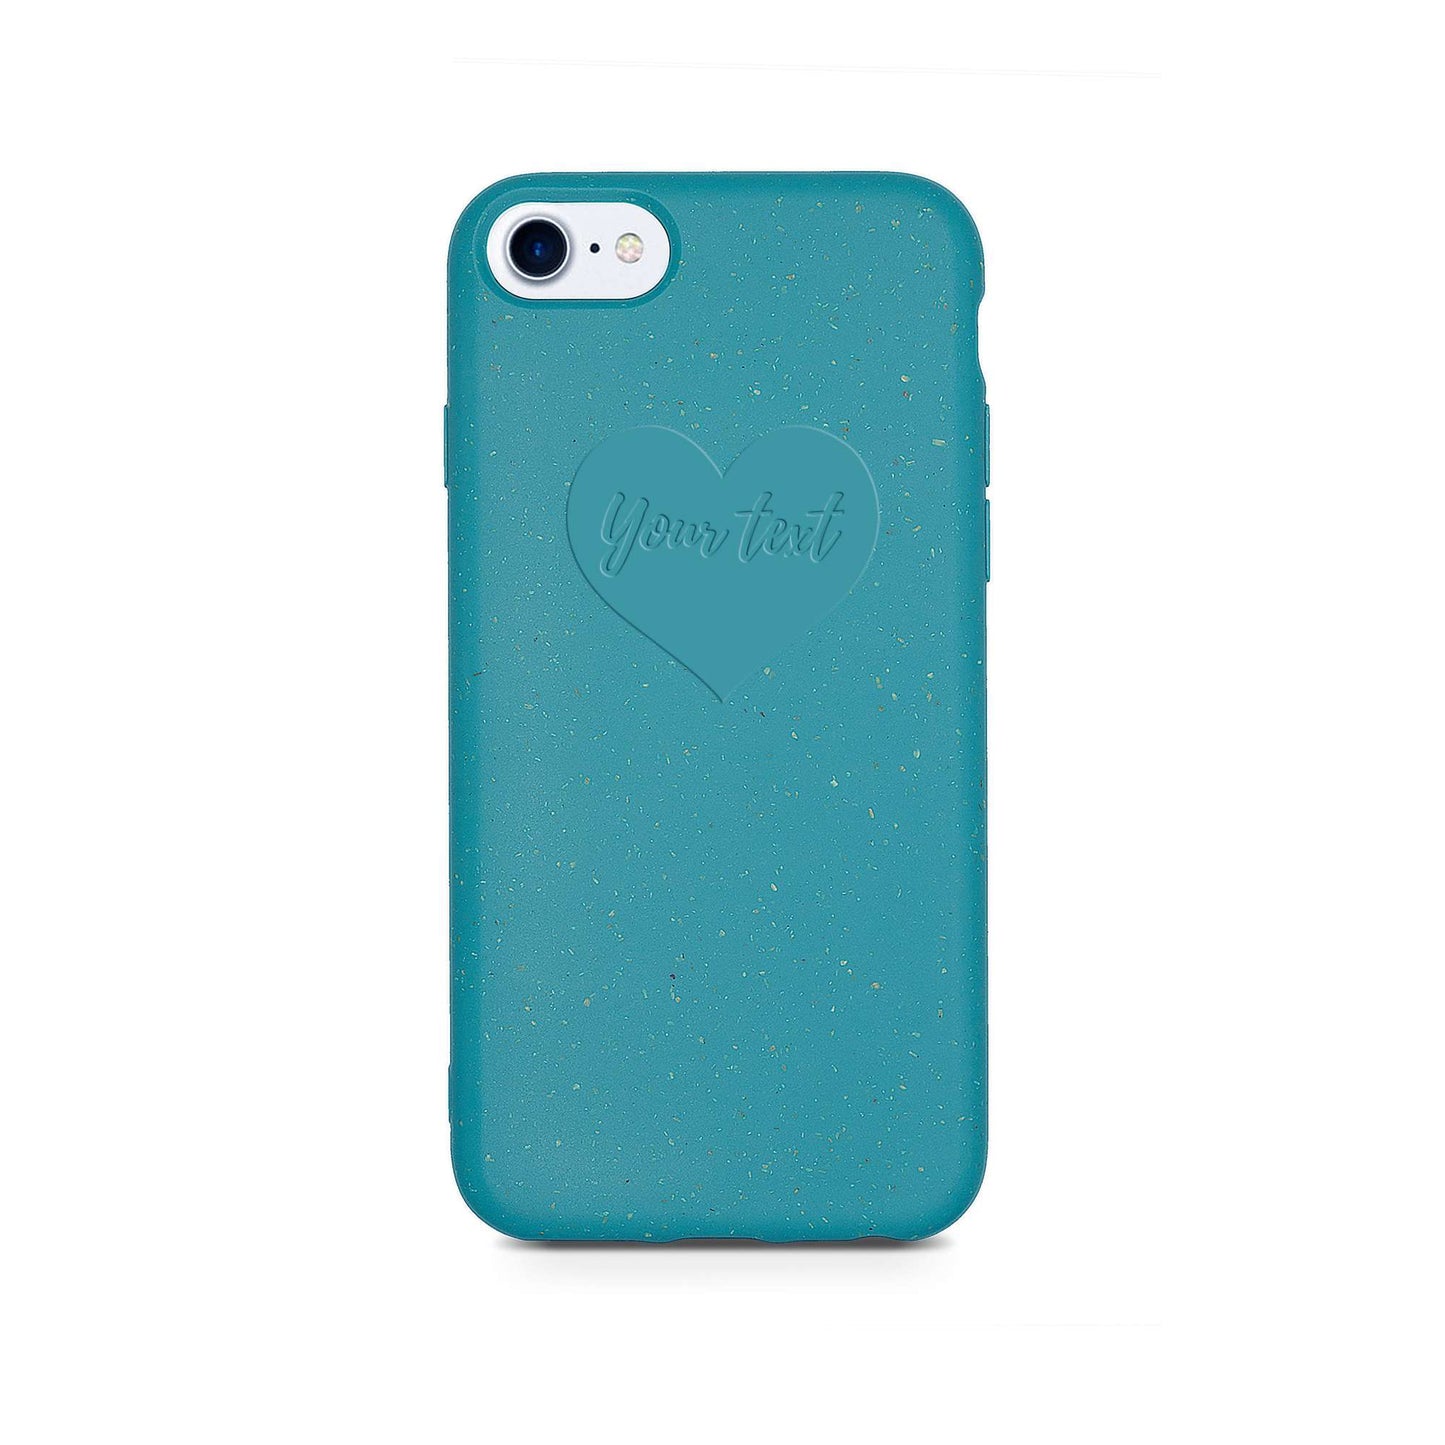 Biodegradable Personalized Phone Case - Ocean Blue Axcestories